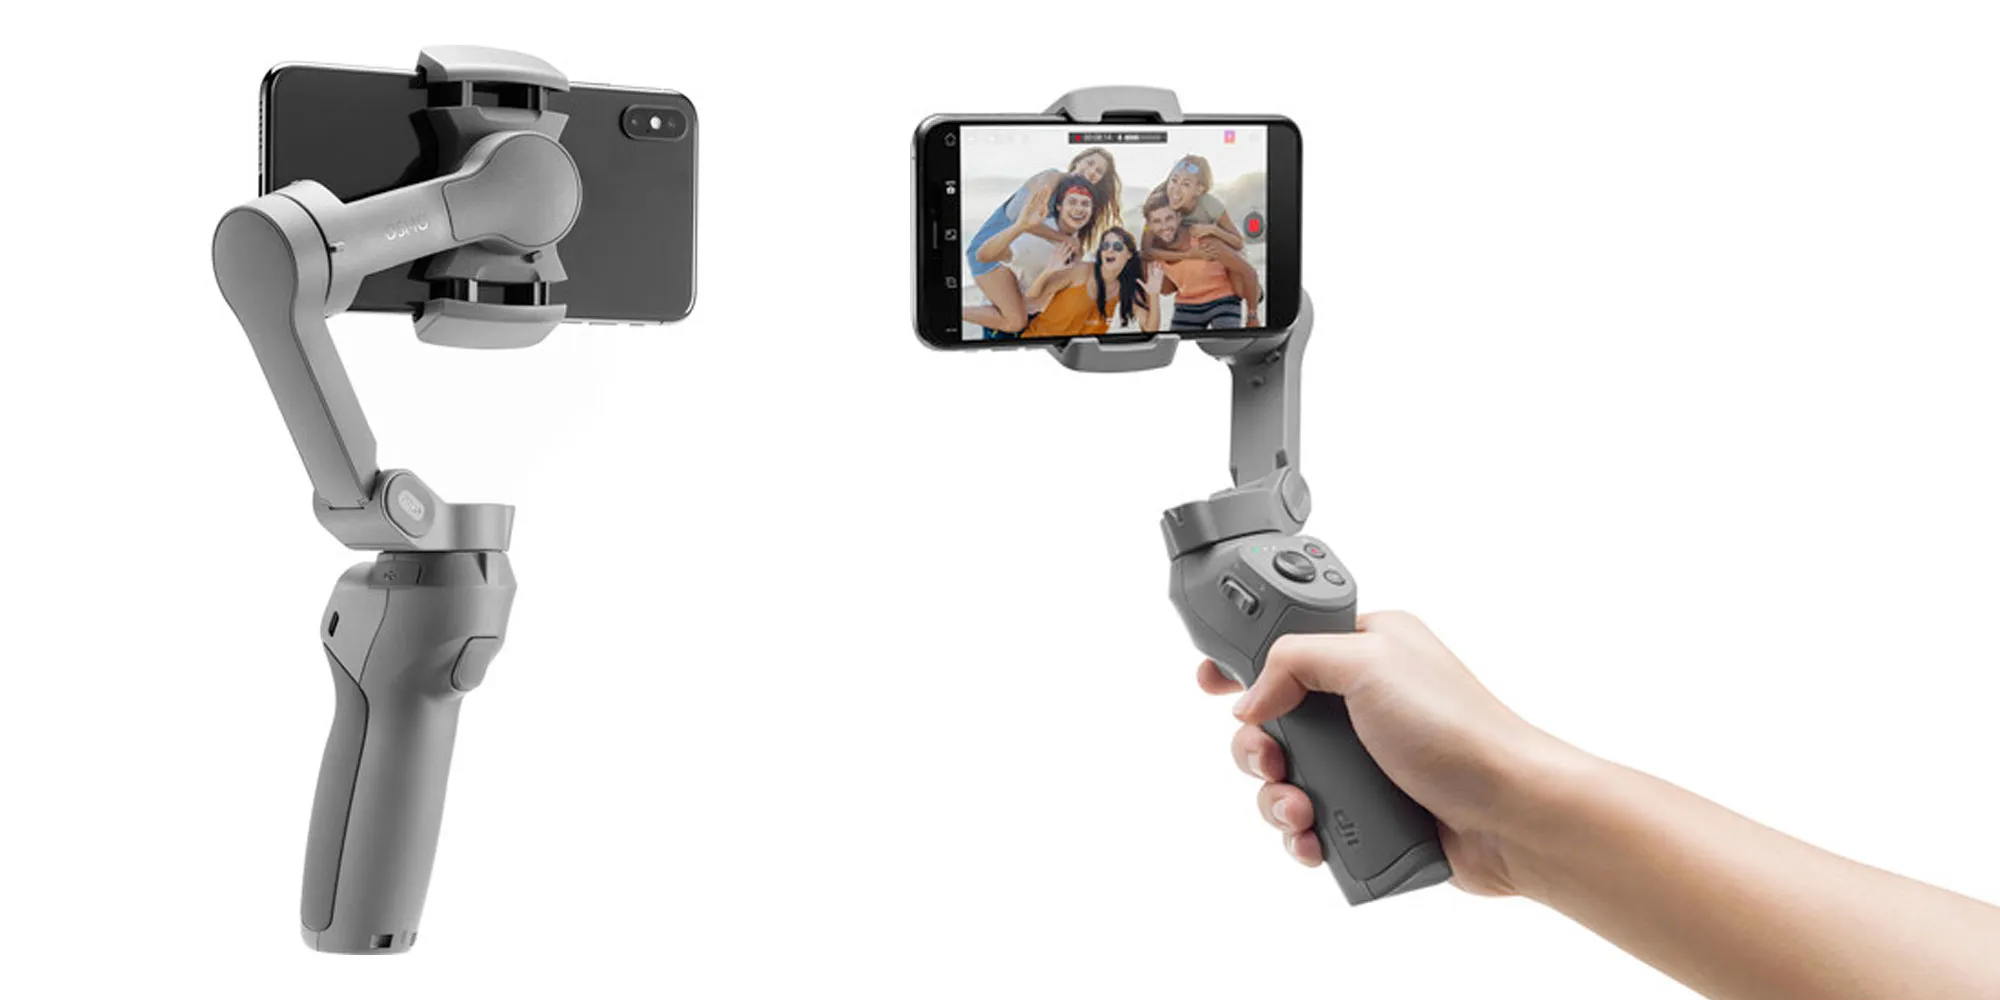 DJI Osmo Mobile 3 Combo 3-Axis Gimbal Stabilizer for Mobile Phones Gray  CP.OS.00000040.01 - Best Buy